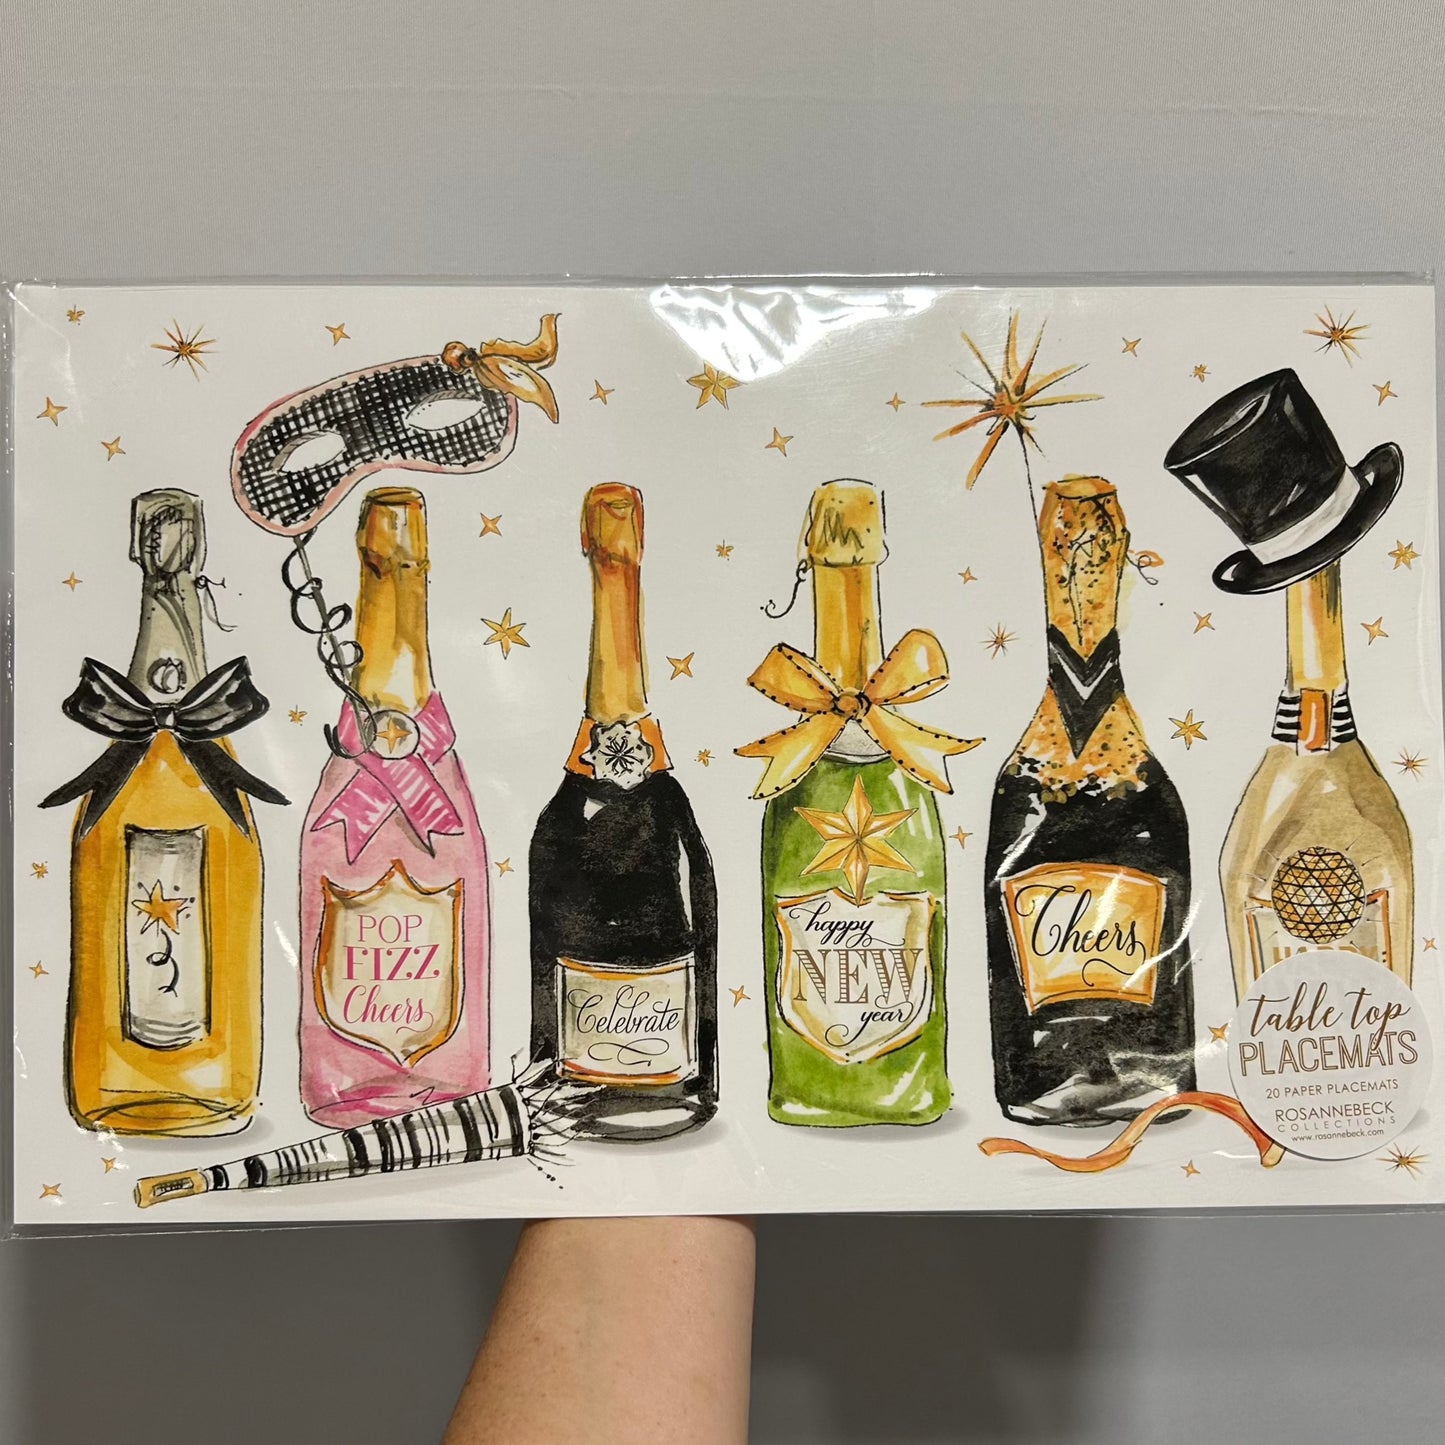 Handpainted Party Champagne Bottles New Years Placemats